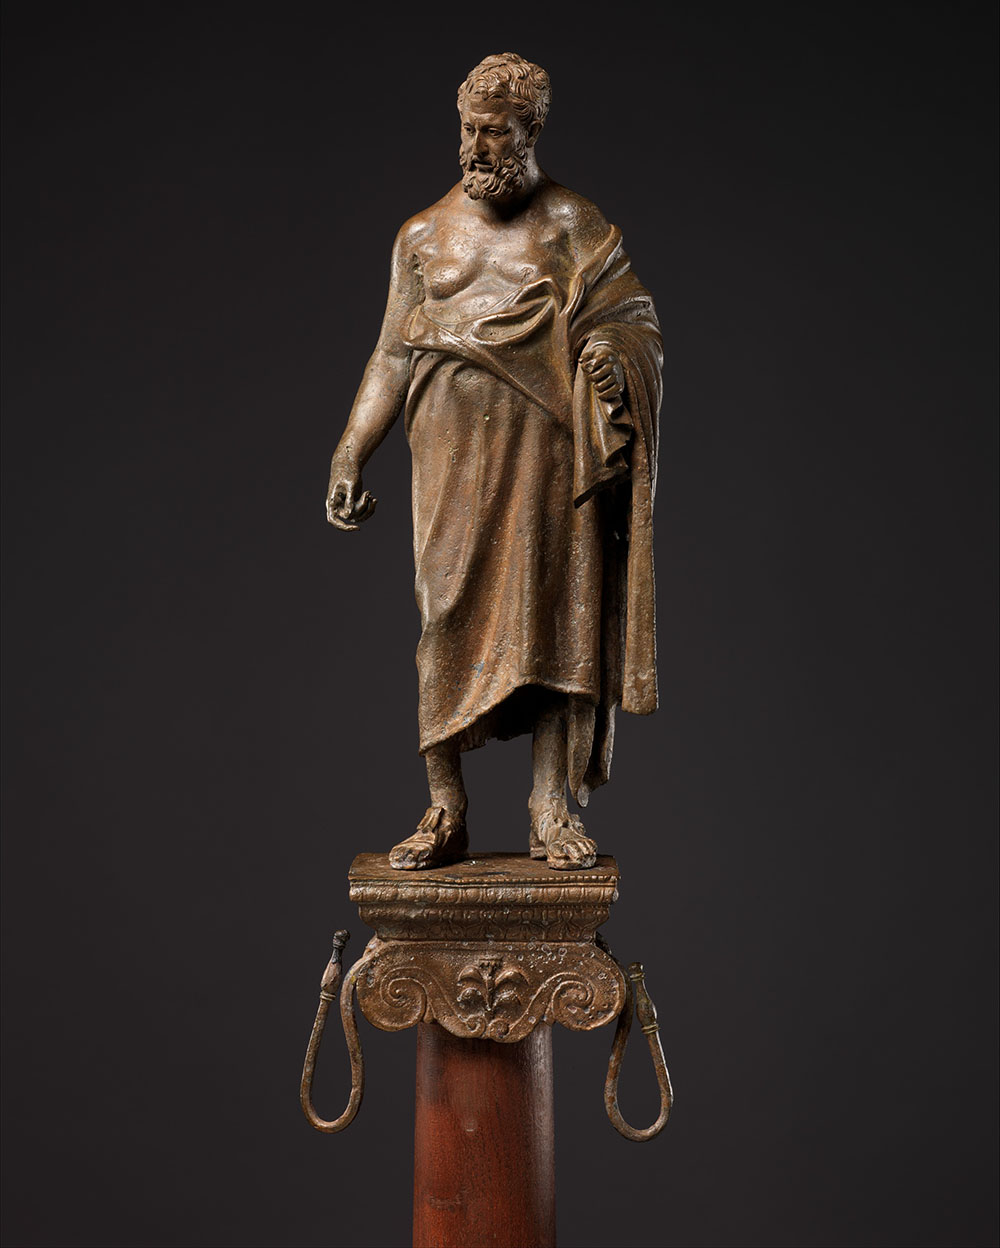 Bronze statuette of a philosopher on a lamp stand, Roman, first century BC.